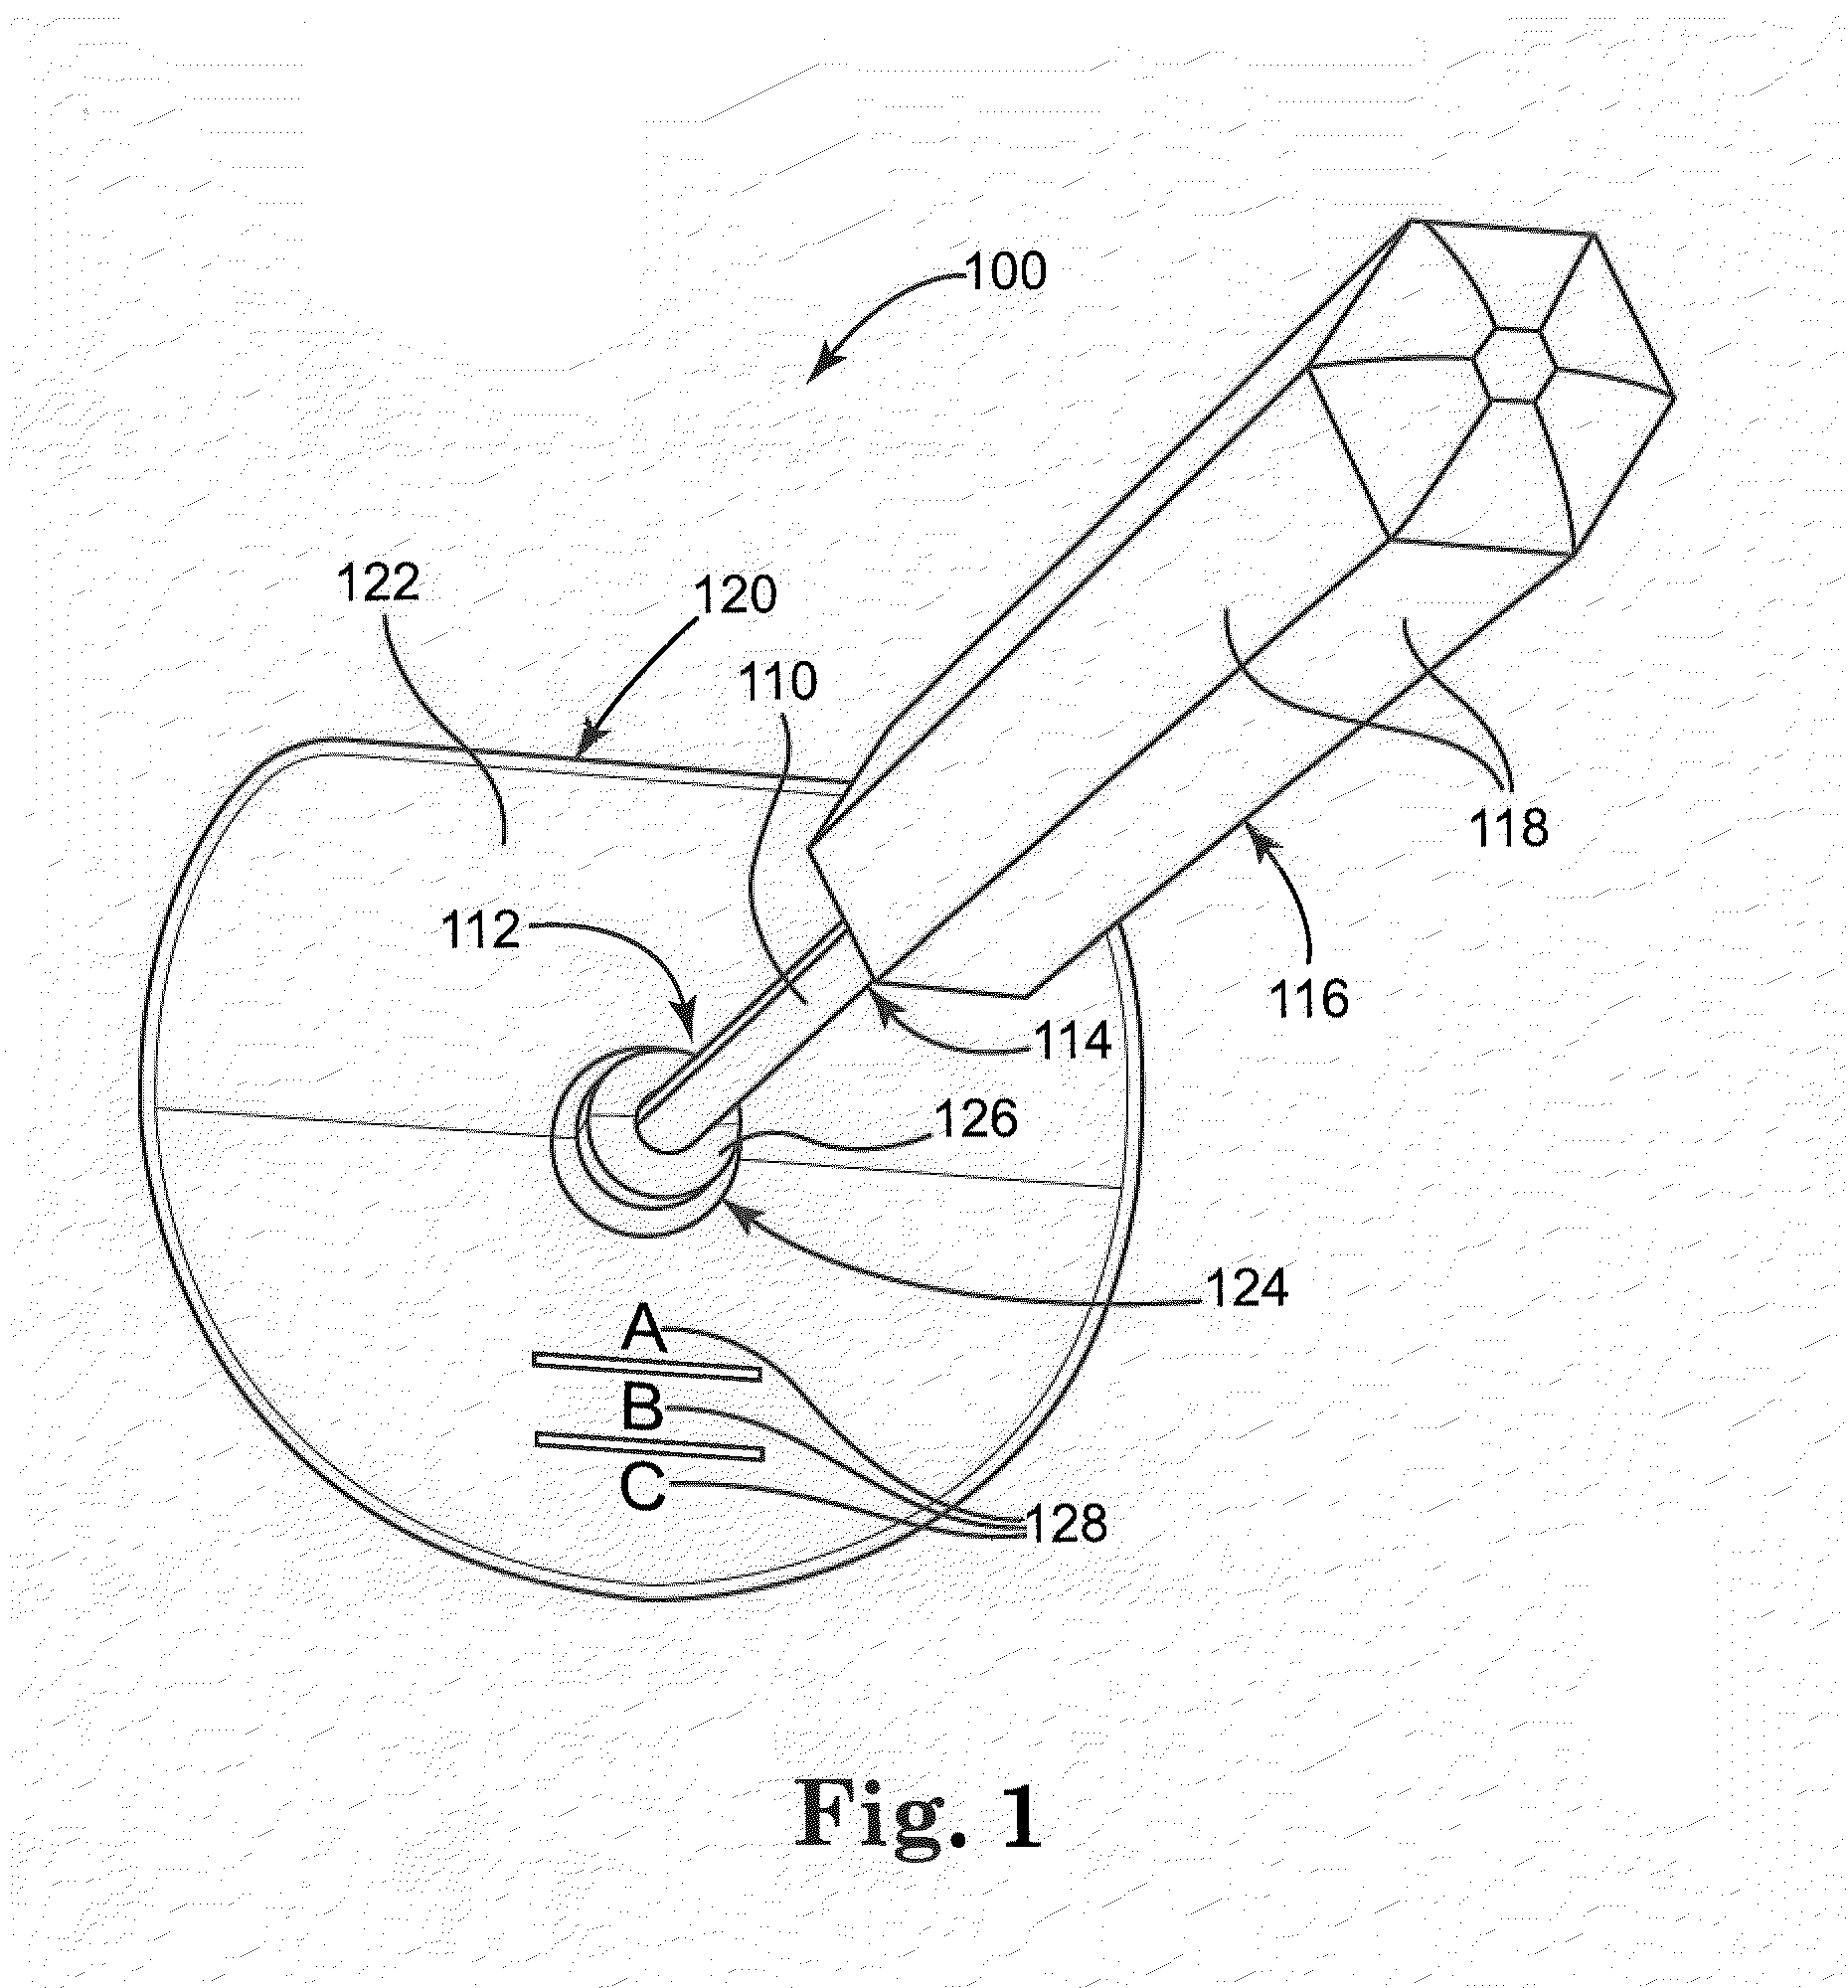 Sizer Device Having a Plurality of Anterior-Posterior Ratios